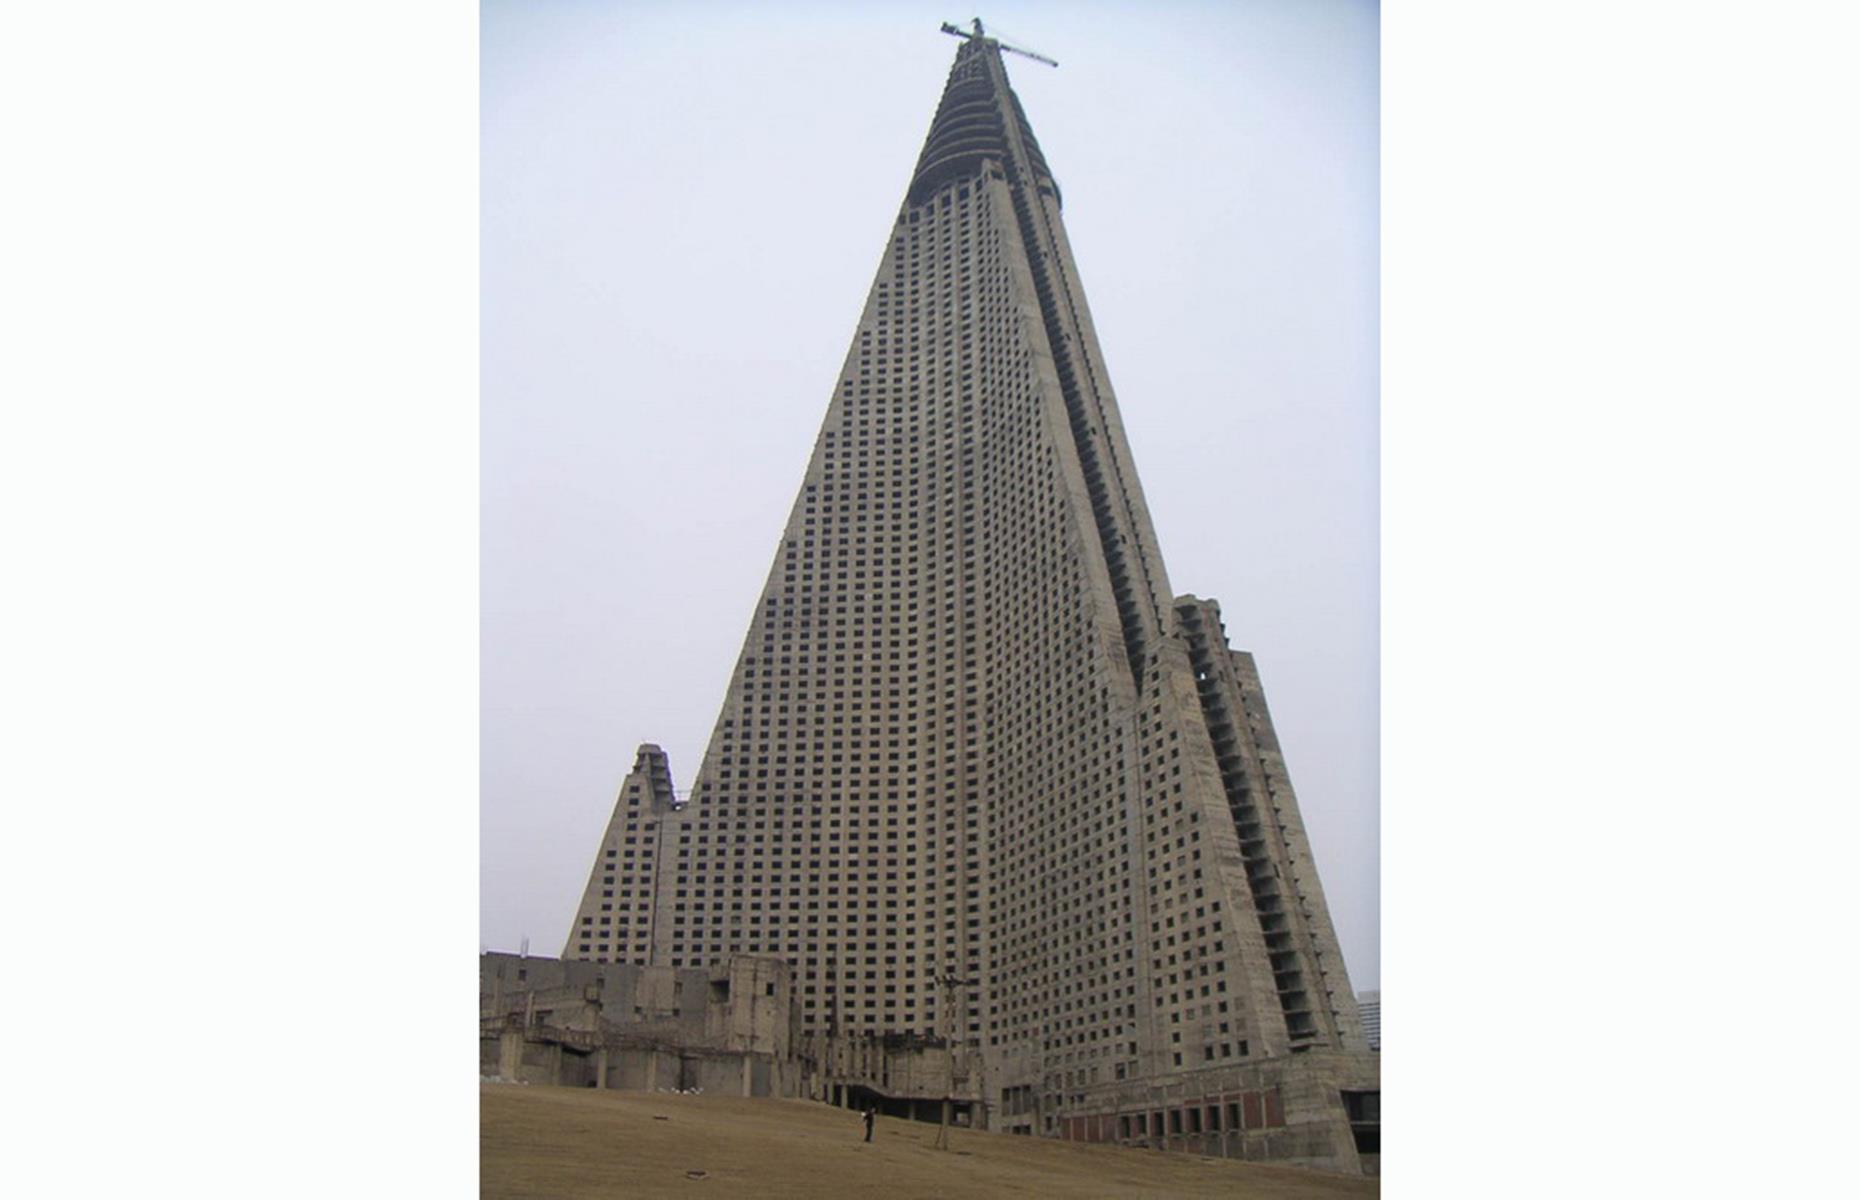 <p>For years, the building's hollow shell lay abandoned – a hundred or so seemingly empty floors gathering dust and dirt – resembling something out of a dystopian, apocalyptic movie. It was during this time that the monstrous structure, towering over the rest of Pyongyang's buildings, earned the moniker 'Hotel of Doom'.</p>  <p><a href="https://www.loveexploring.com/galleries/185399/these-european-hotels-once-thronged-with-tourists-now-they-stand-abandoned?page=1"><strong>Discover Europe's eeriest abandoned hotels</strong></a></p>